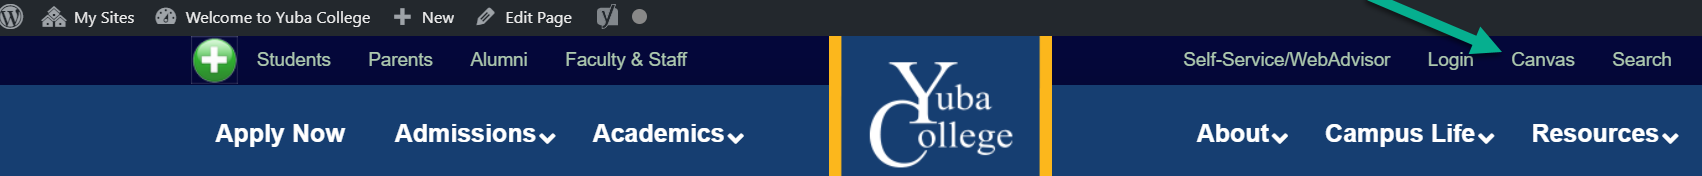 Canvas link on Yuba College Home Page